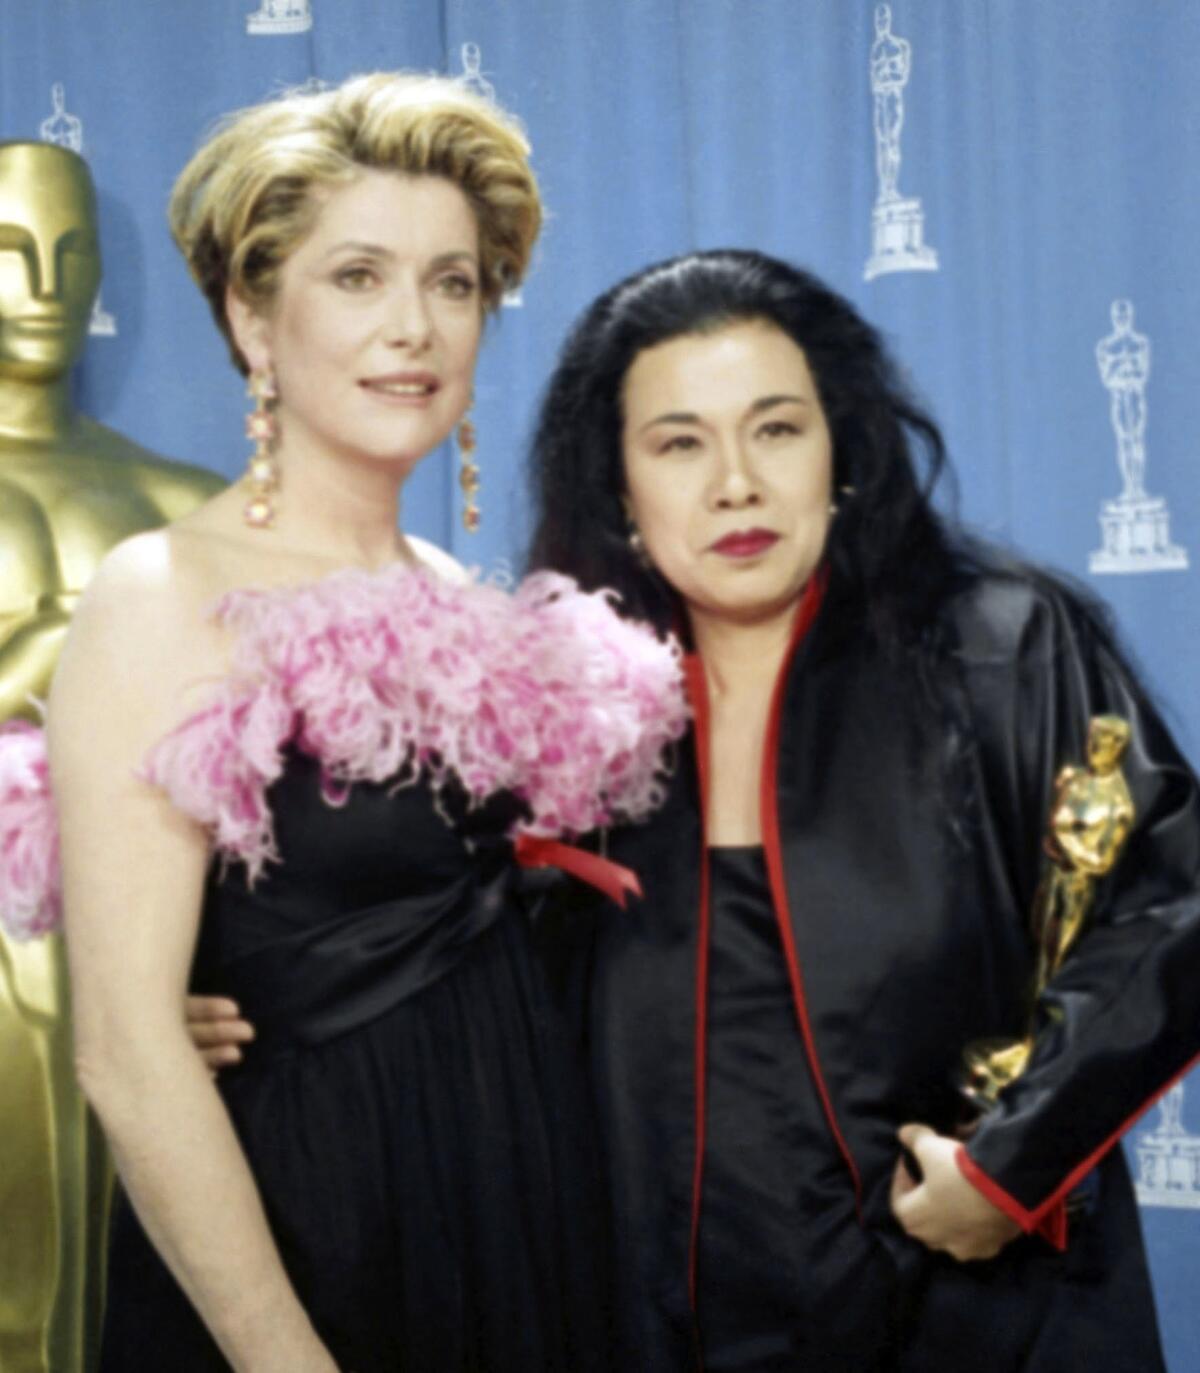 Actress Catherine Deneuve poses with Eiko Ishioka as she holds her Oscar for best costume design for "Bram Stoker's Dracula" backstage at the 1993 Academy Awards in Los Angeles.